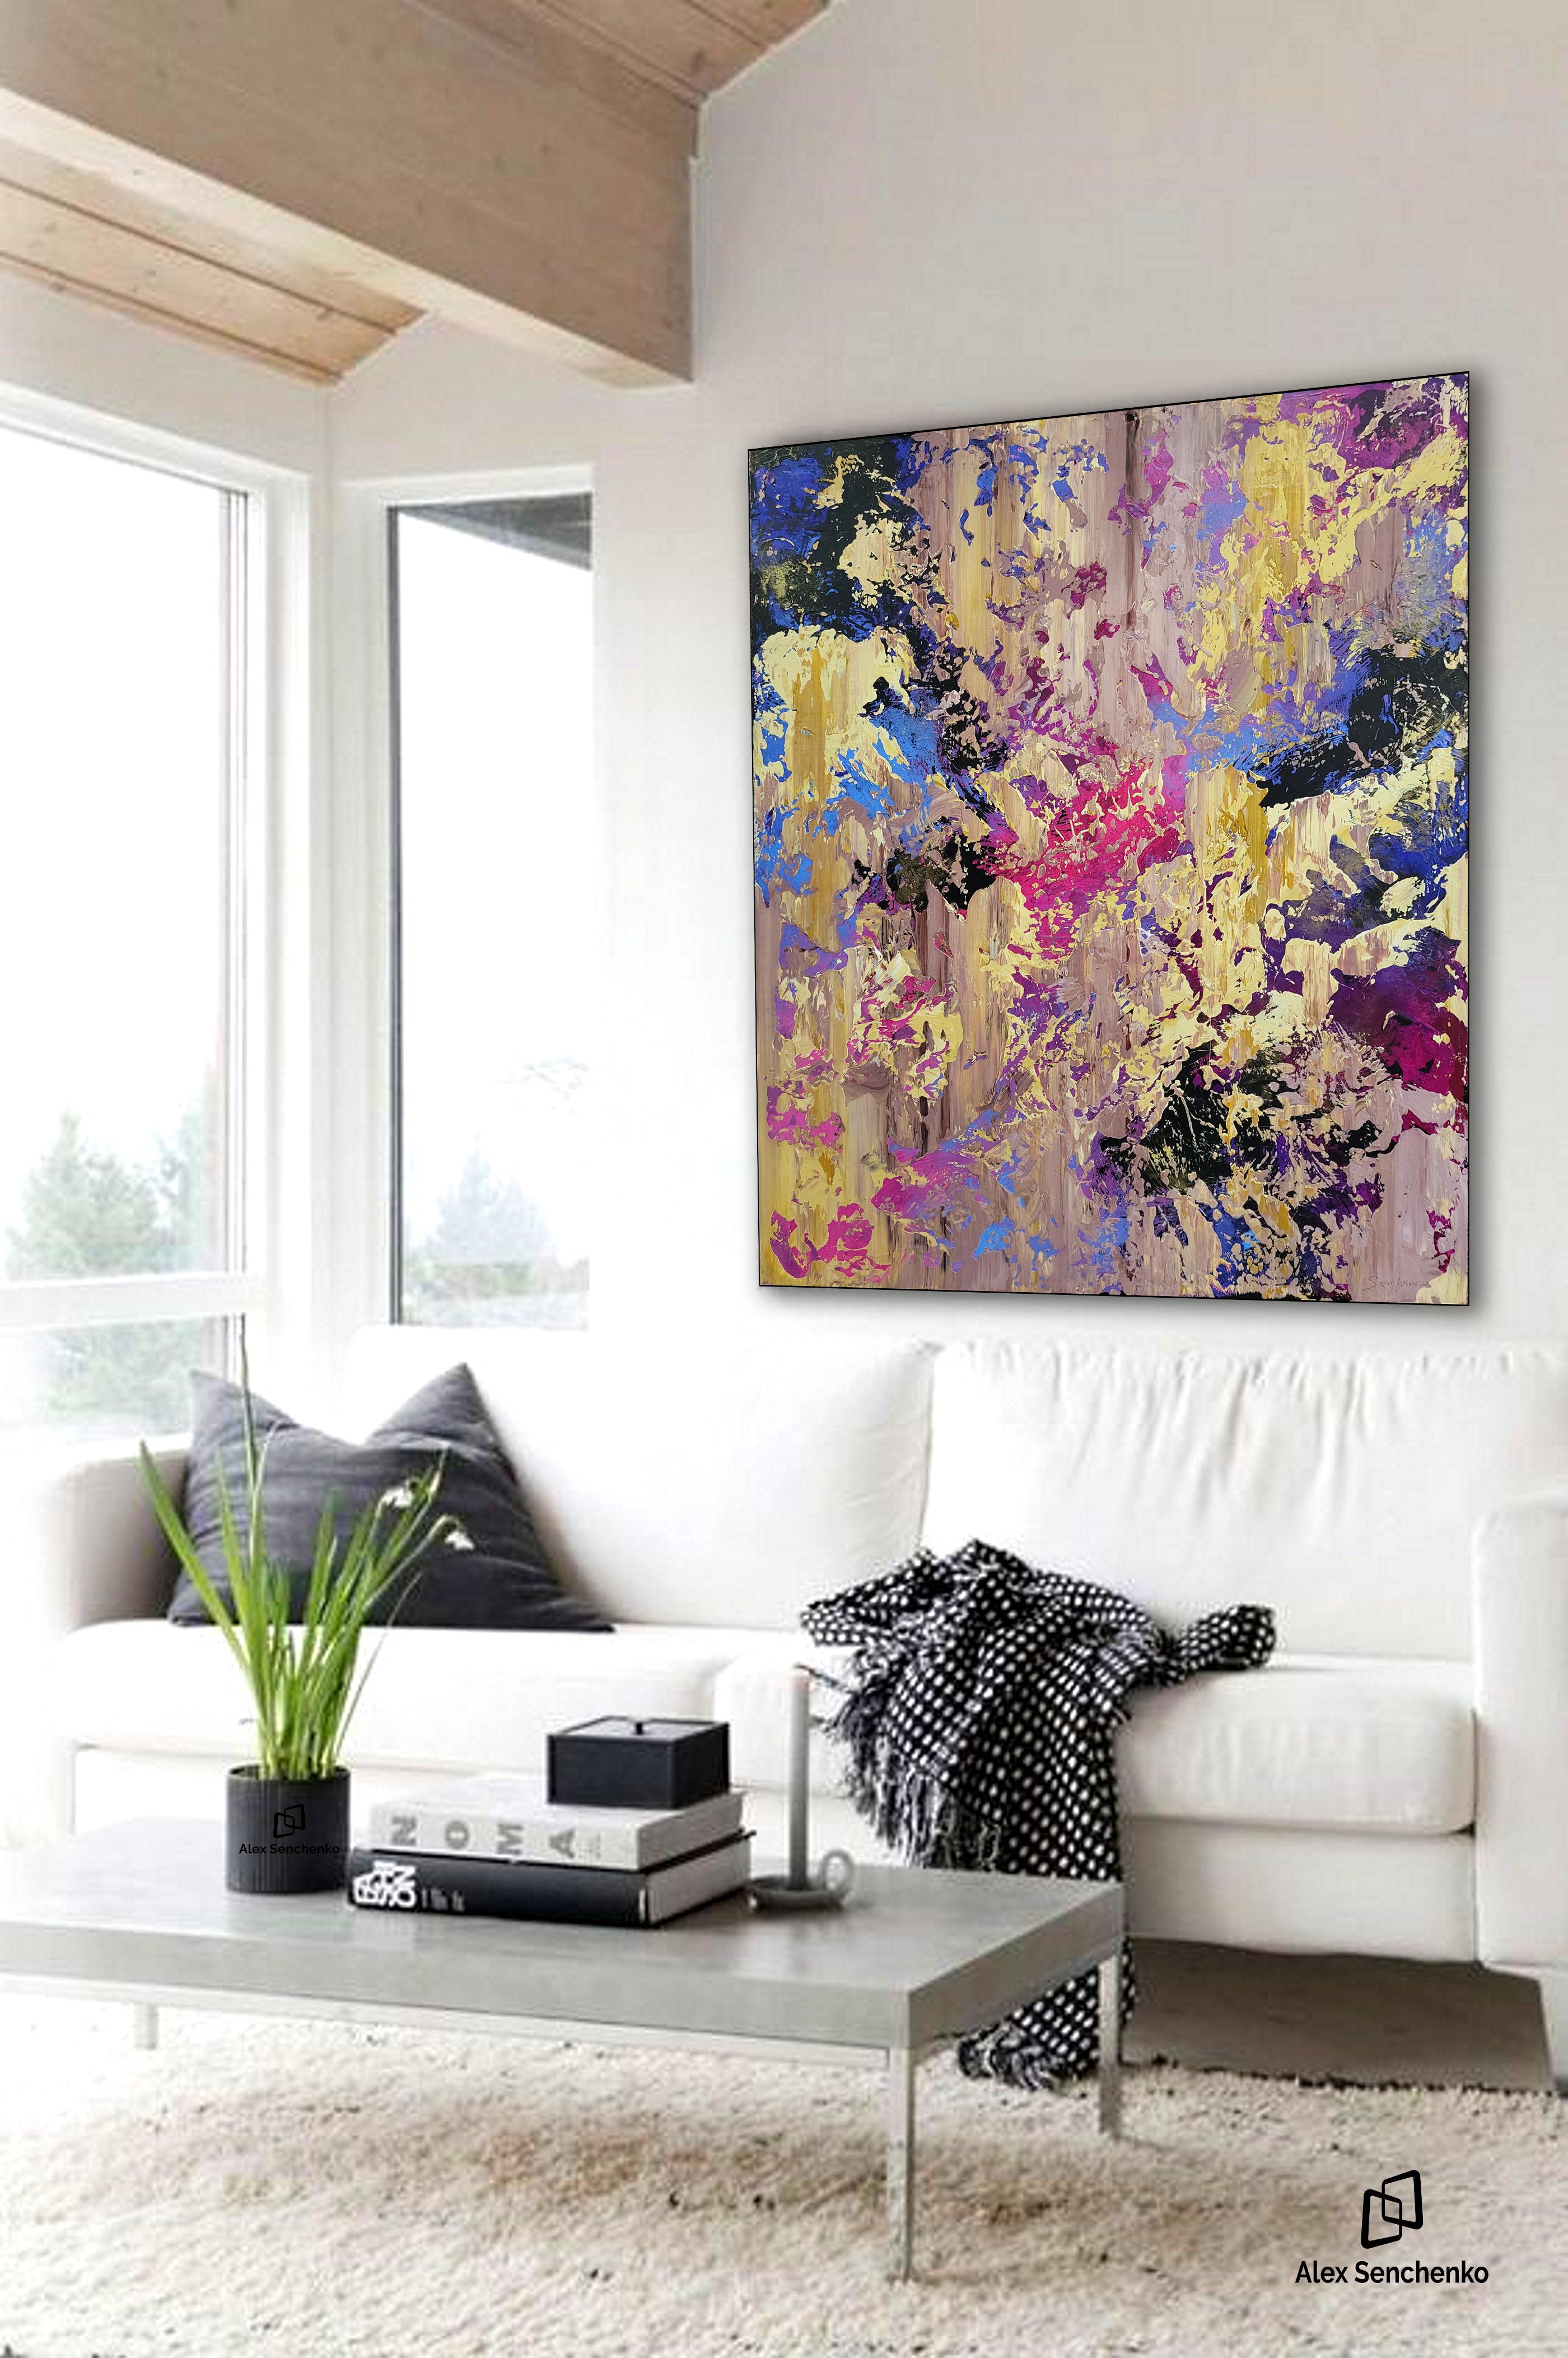 There’s something different about the homes of creative people. They like to surround themselves with inspiring things, from unique tablecloths to the incredible paintings on the walls.
Alex Senchenko’s - Abstract 2357 - can give your home that